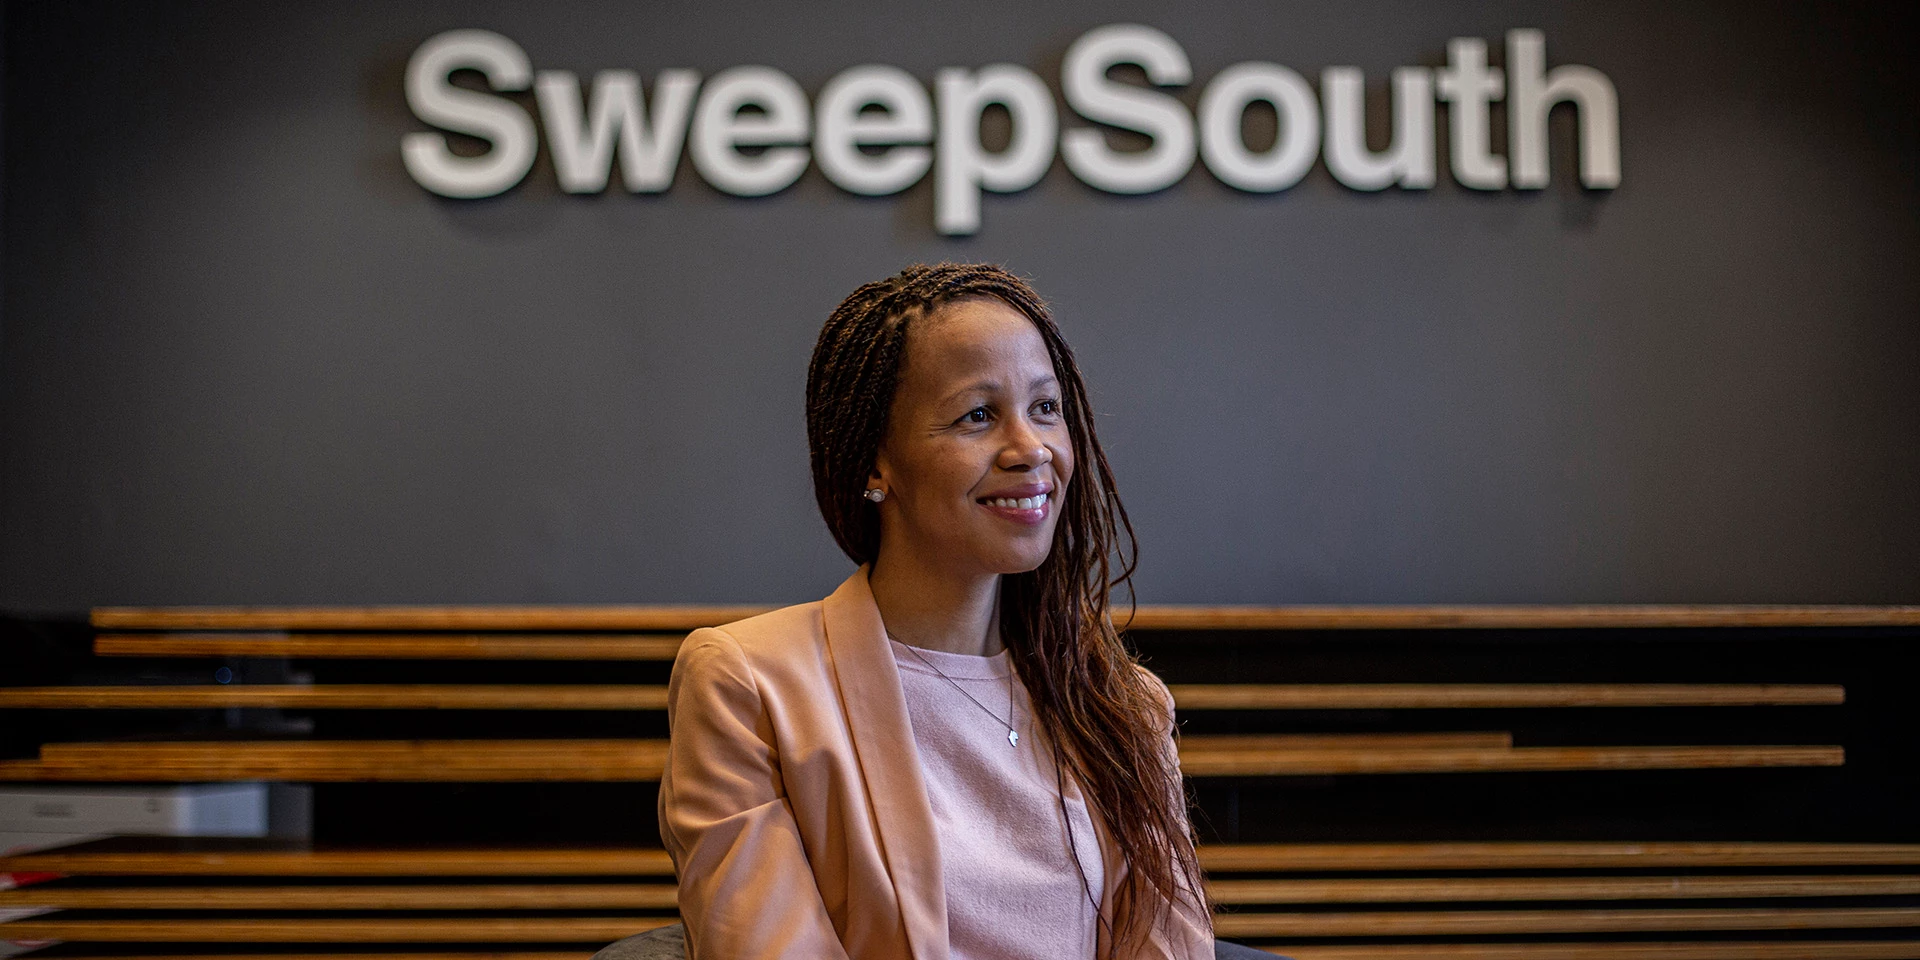 CAPE TOWN, SOUTH AFRICA - OCTOBER 29: 
Aisha Pandor, CEO and Co-founder SweepSouth, at the SweepSouth offices in Cape Town, South Africa, on the morning of October 29, 2020. SweepSouth is a tech company that matches domestic workers with homeowners through an app.

Photo © Charlie Shoemaker/International Finance Corporation